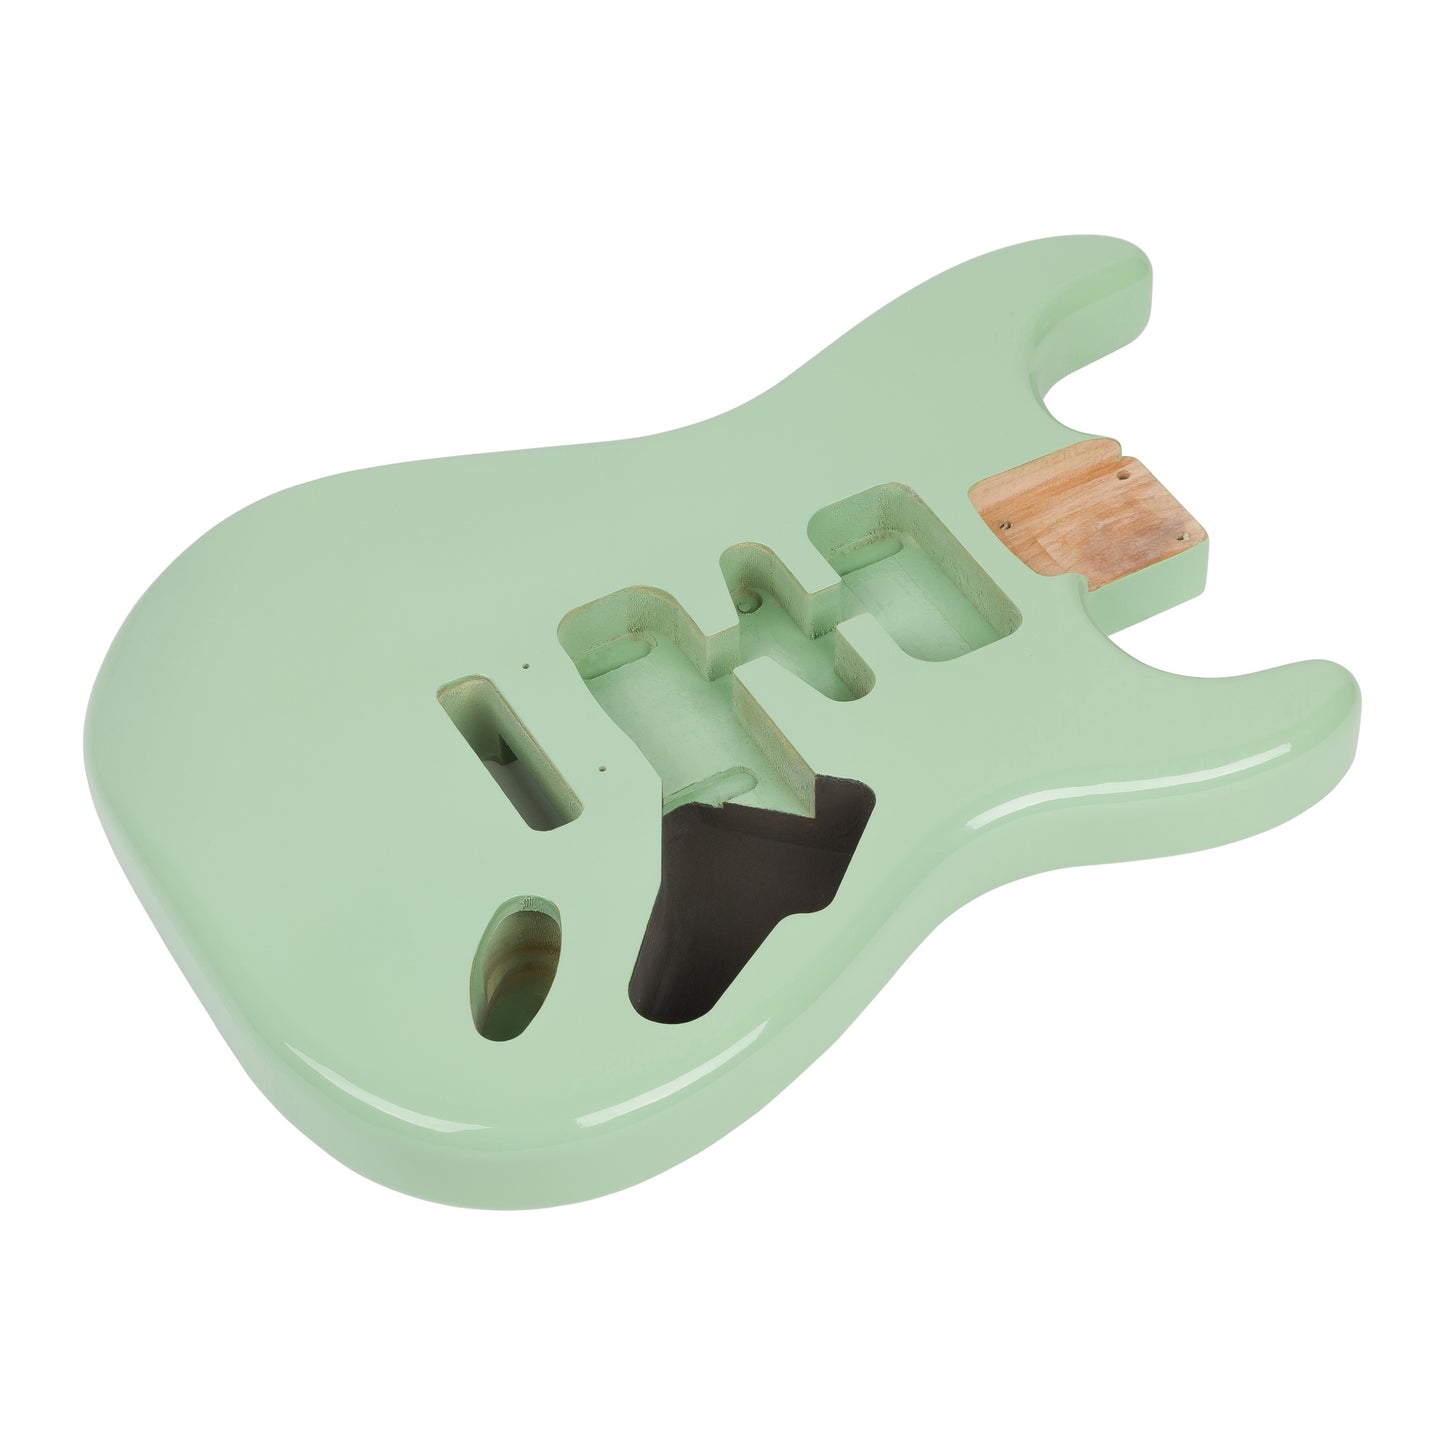 AE Guitars® S-Style Alder Replacement Guitar Body Surf Green Nitro